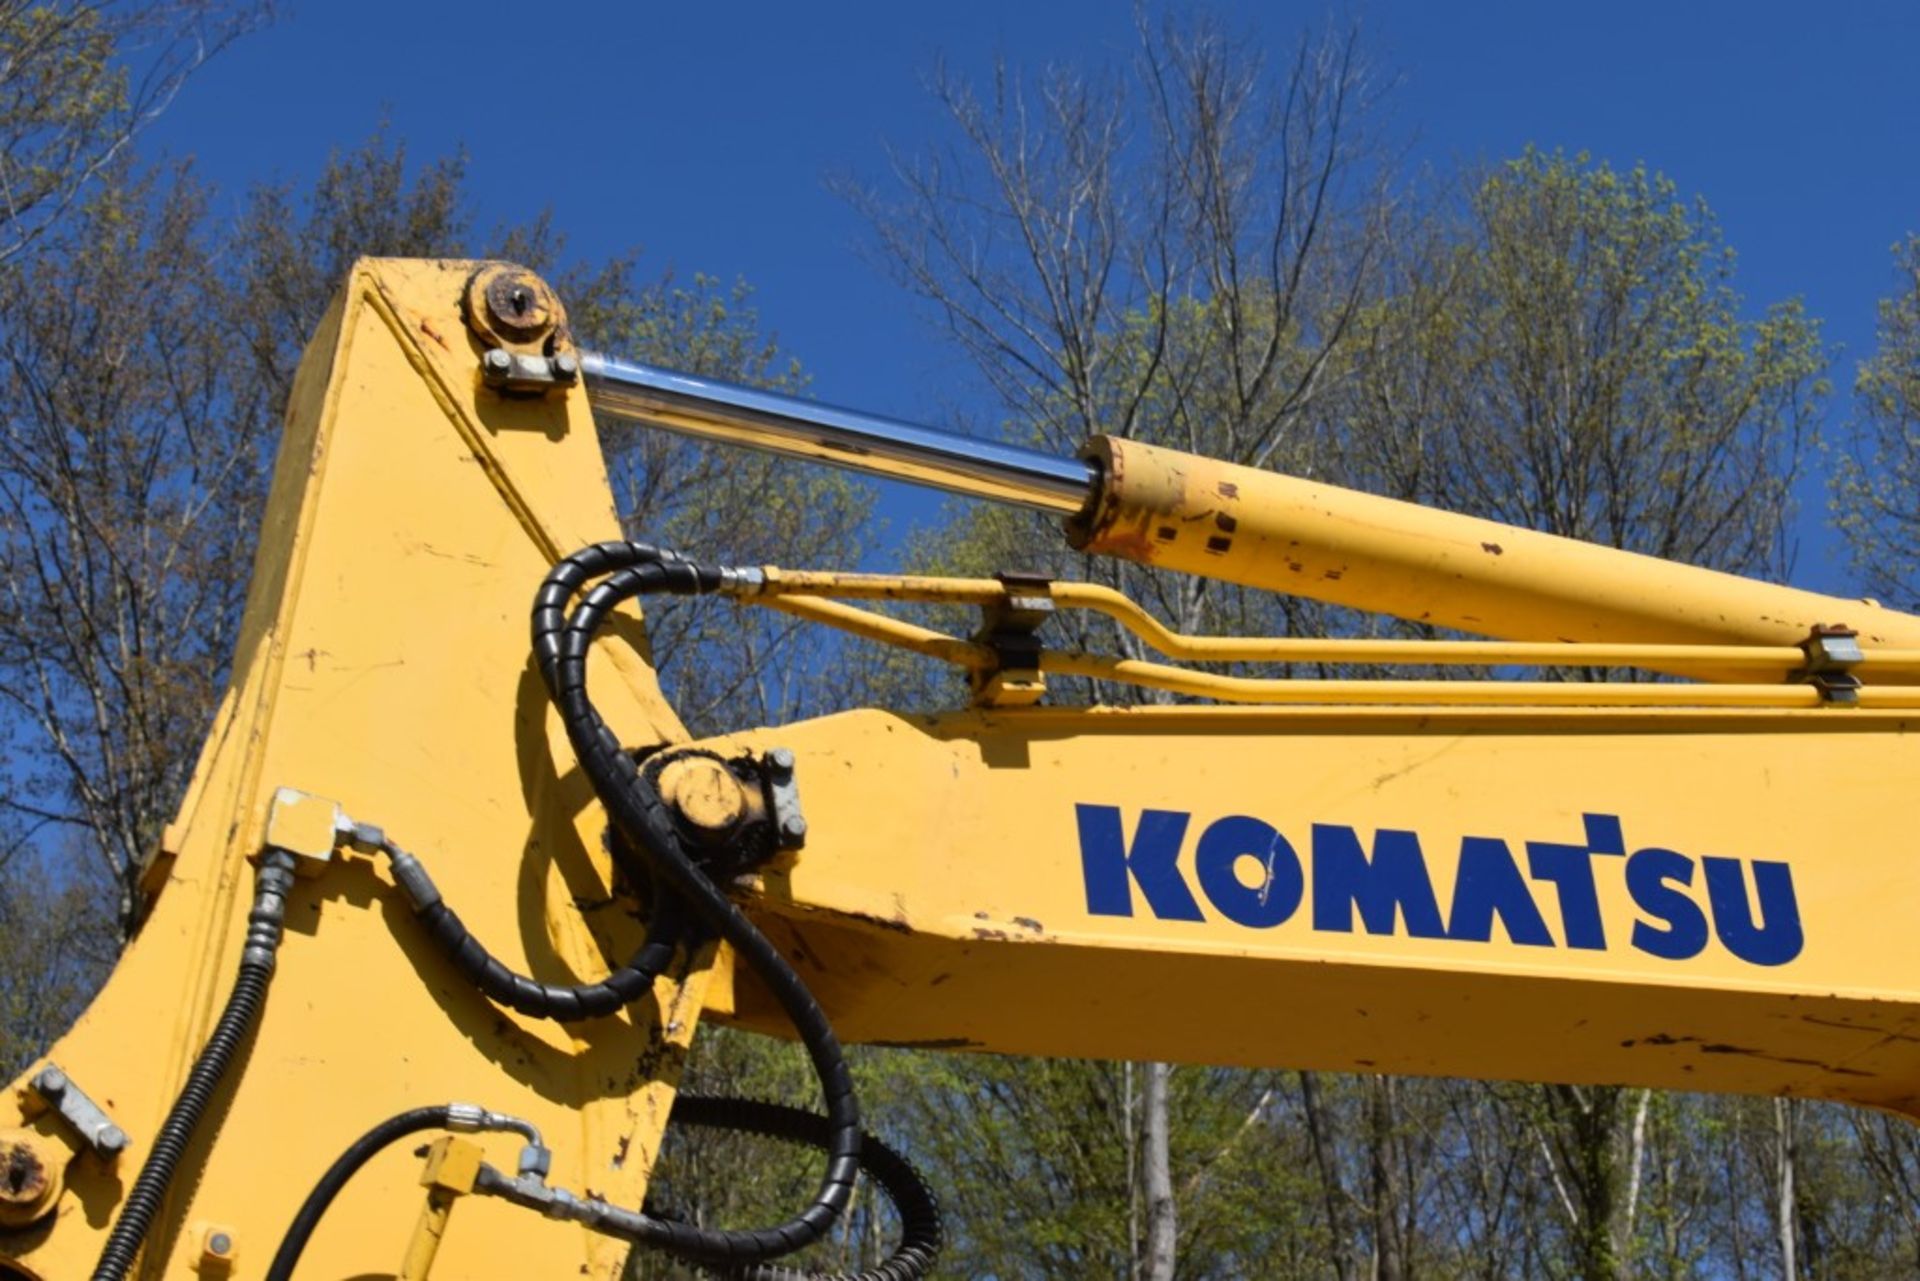 Komatsu PC88MR-8 Excavator 8704 Hours, Runs and Operates, WB 24" Bucket, Quick Coupler, Auxiliary - Image 5 of 49